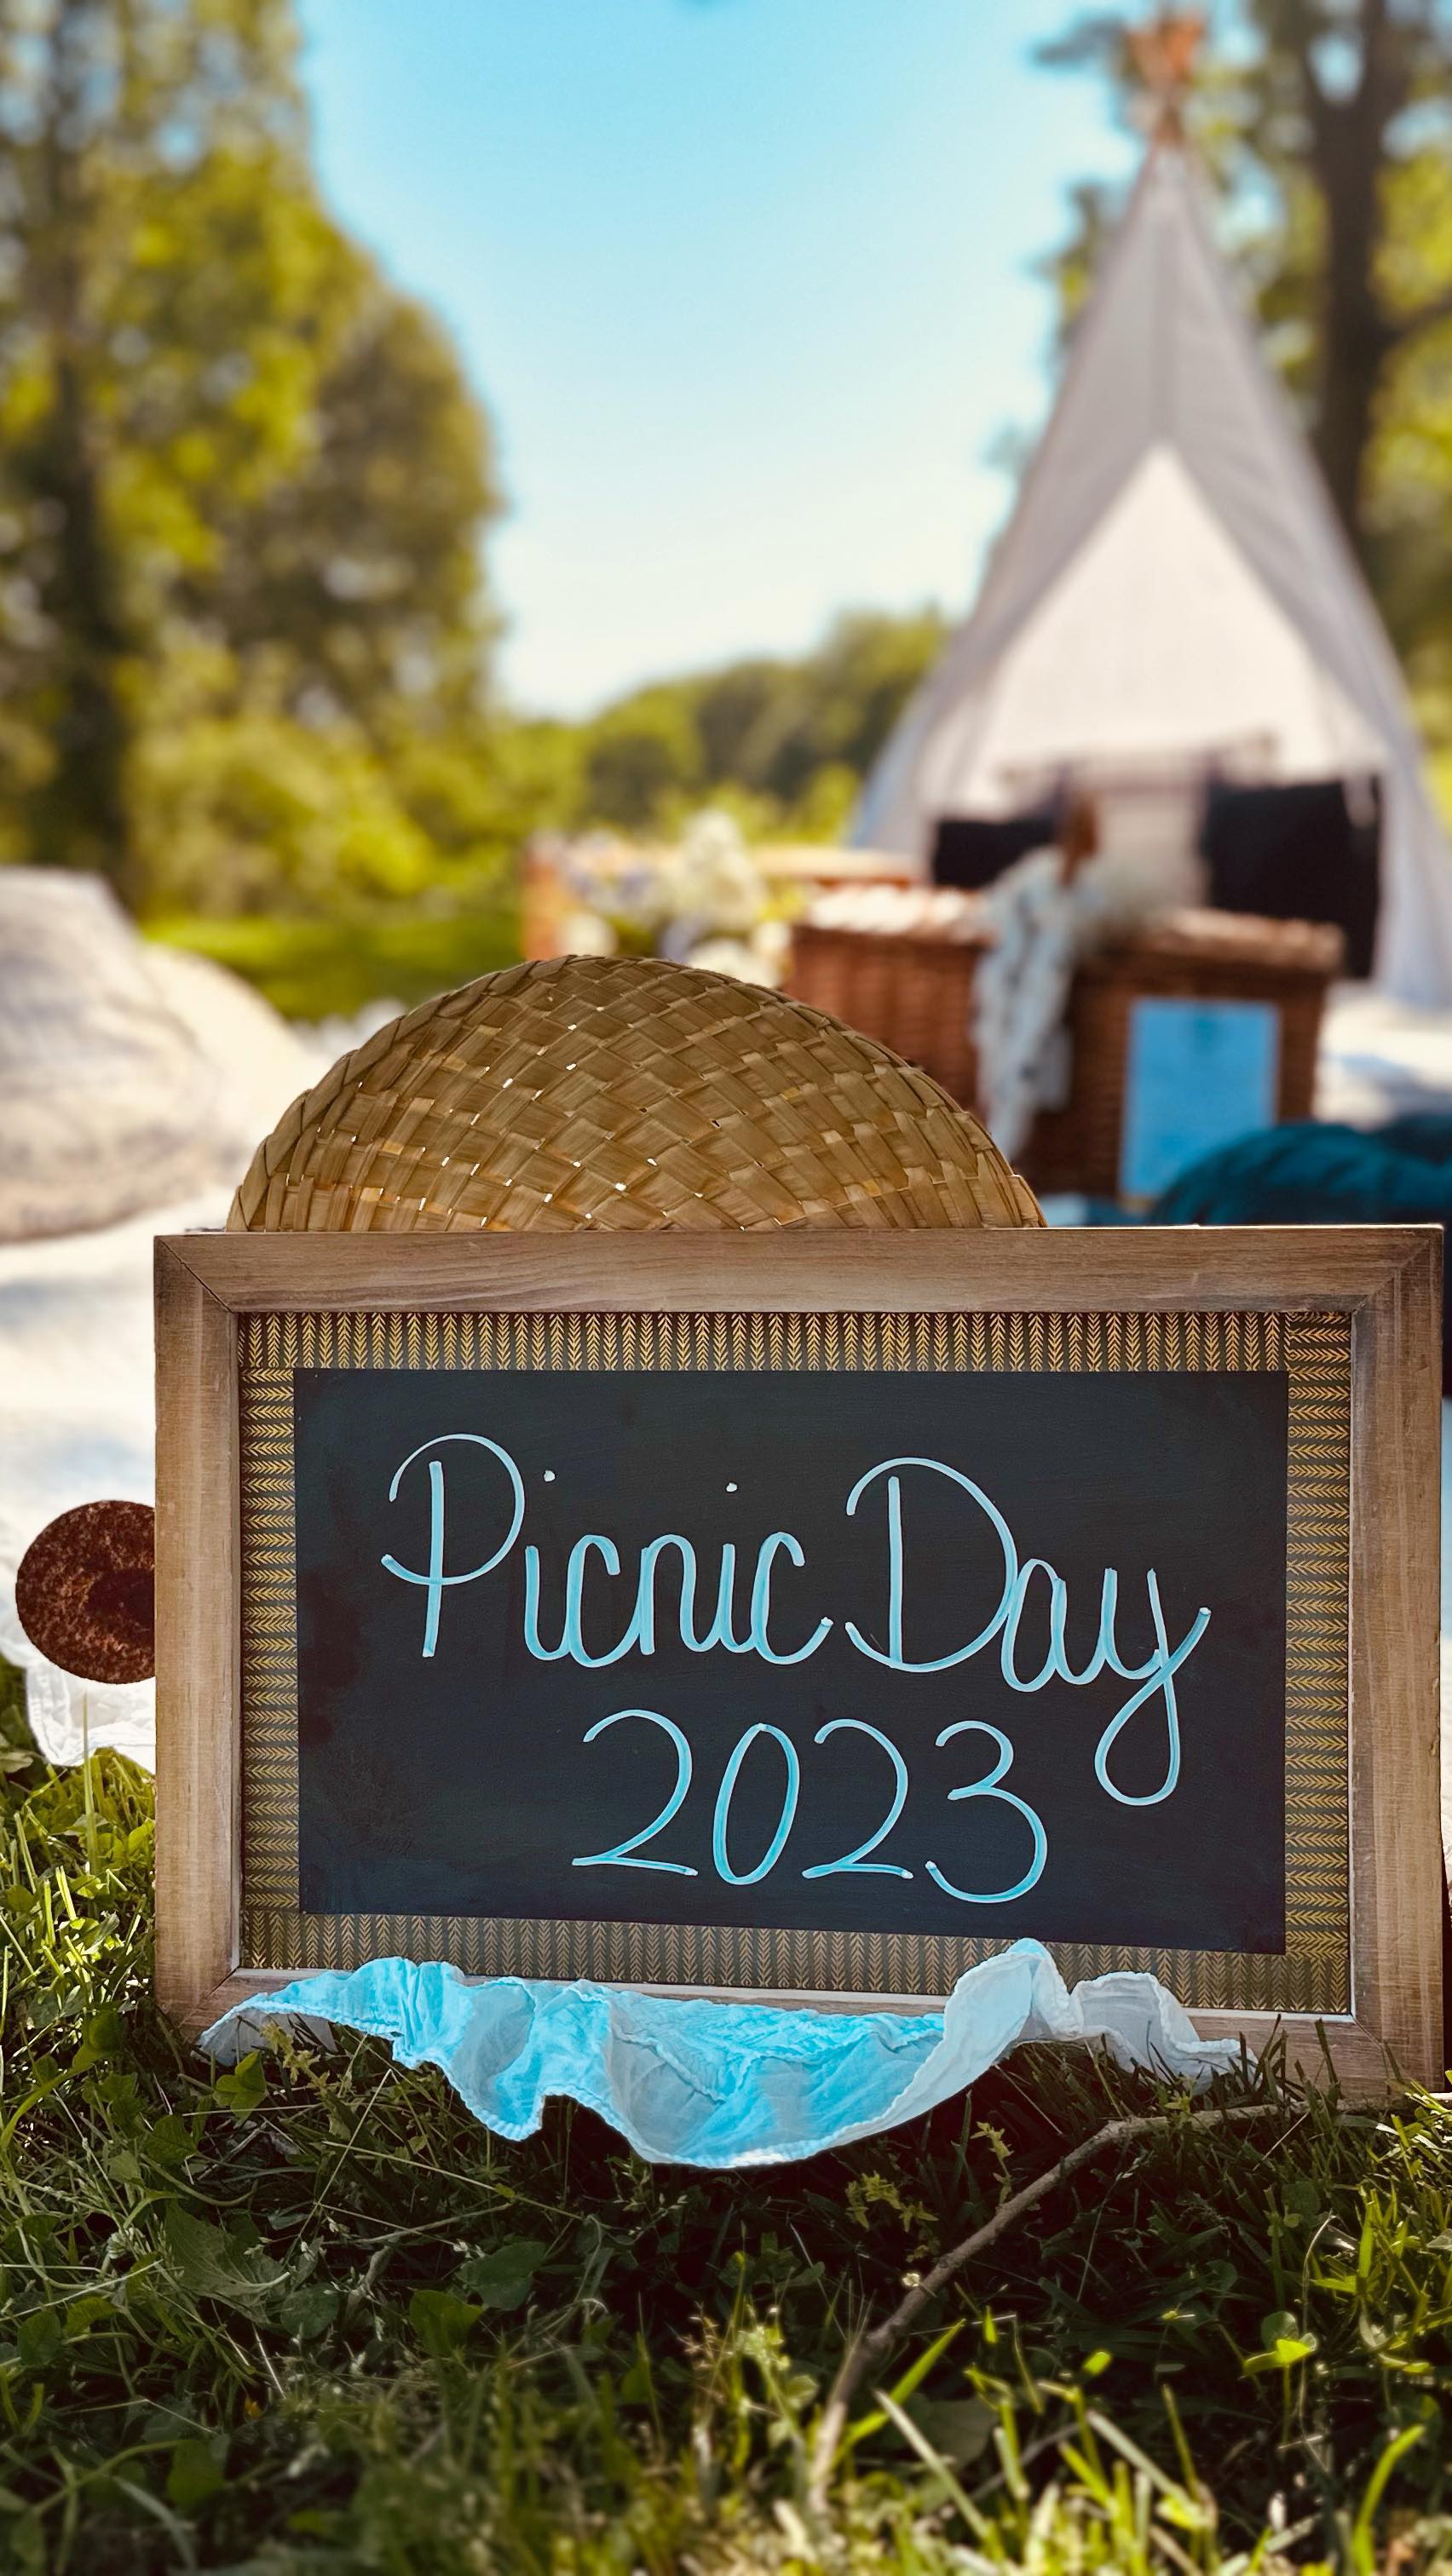 🌳 Happy National Picnic Day! 🧺✨ Today, we’re celebrating the joy of outdoor dining, laughter with loved ones, and creati